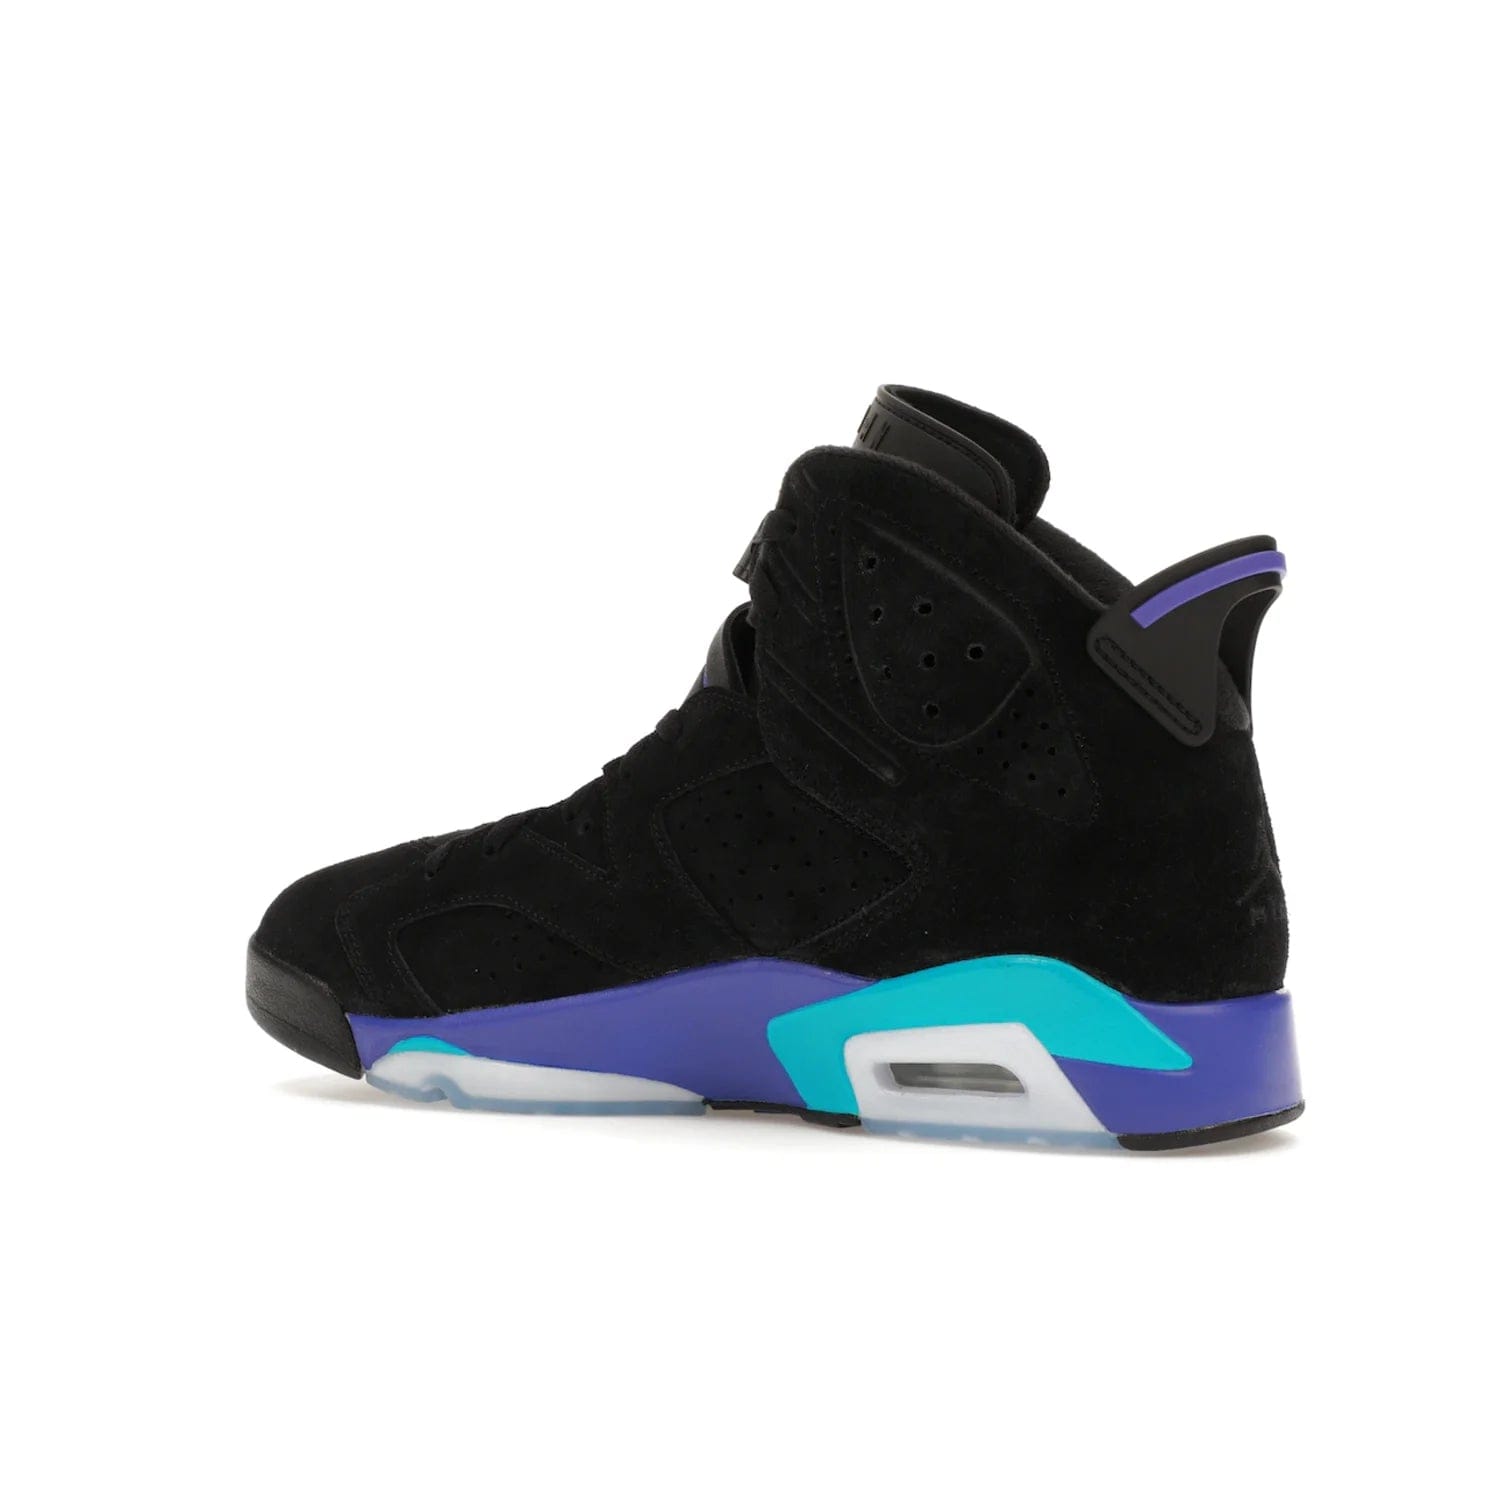 Jordan 6 Retro Aqua - Image 22 - Only at www.BallersClubKickz.com - Feel the classic Jordan 6 Retro Aqua paired with modern style. Black, Bright Concord, and Aquatone hues are crafted with a supple suede and rubberized heel tab. This standout sneaker adds signature Jordan elements at $200. Elevate your style with the Jordan 6 Retro Aqua.